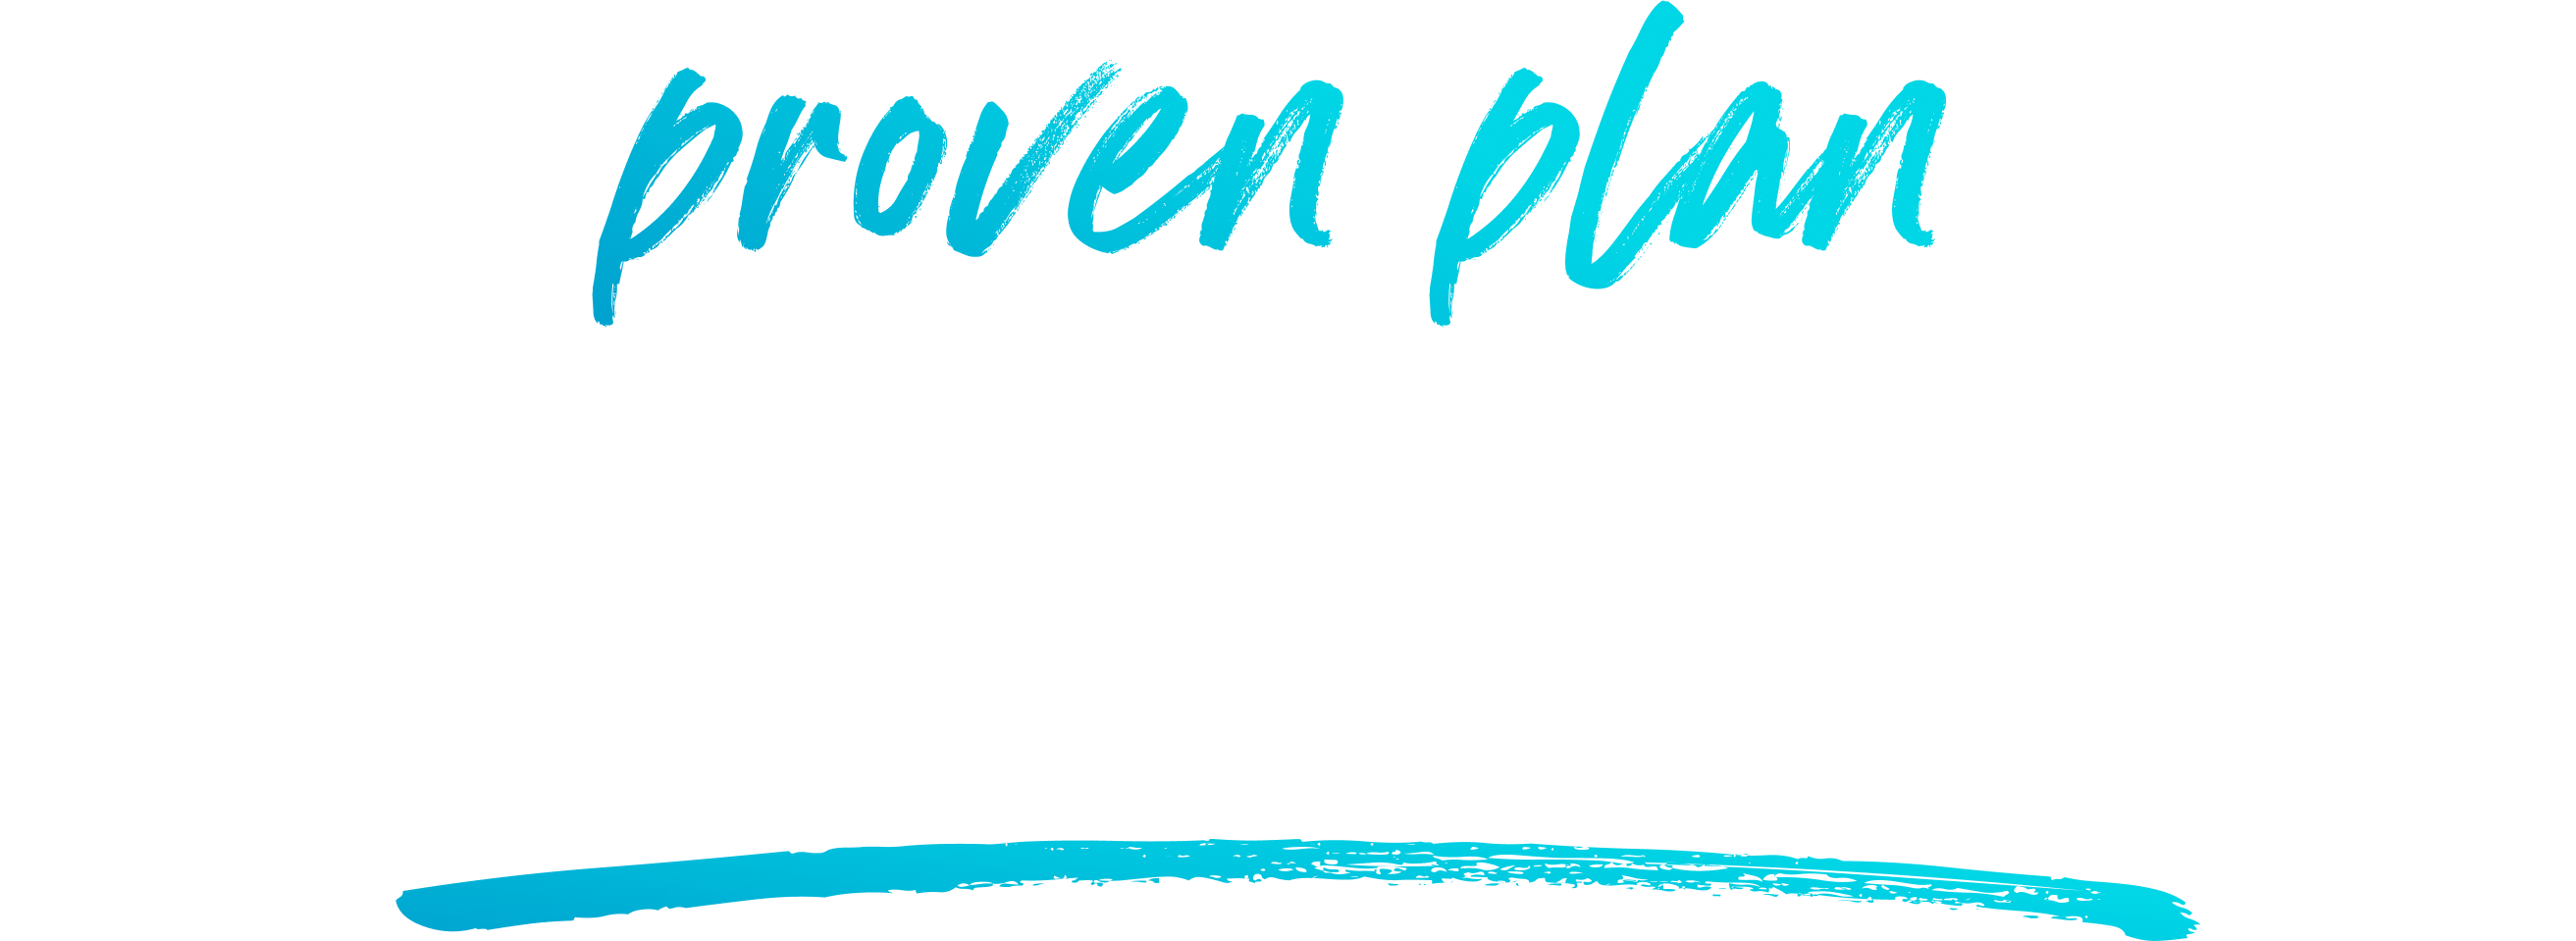 The proven plan for you to become a world-class coach